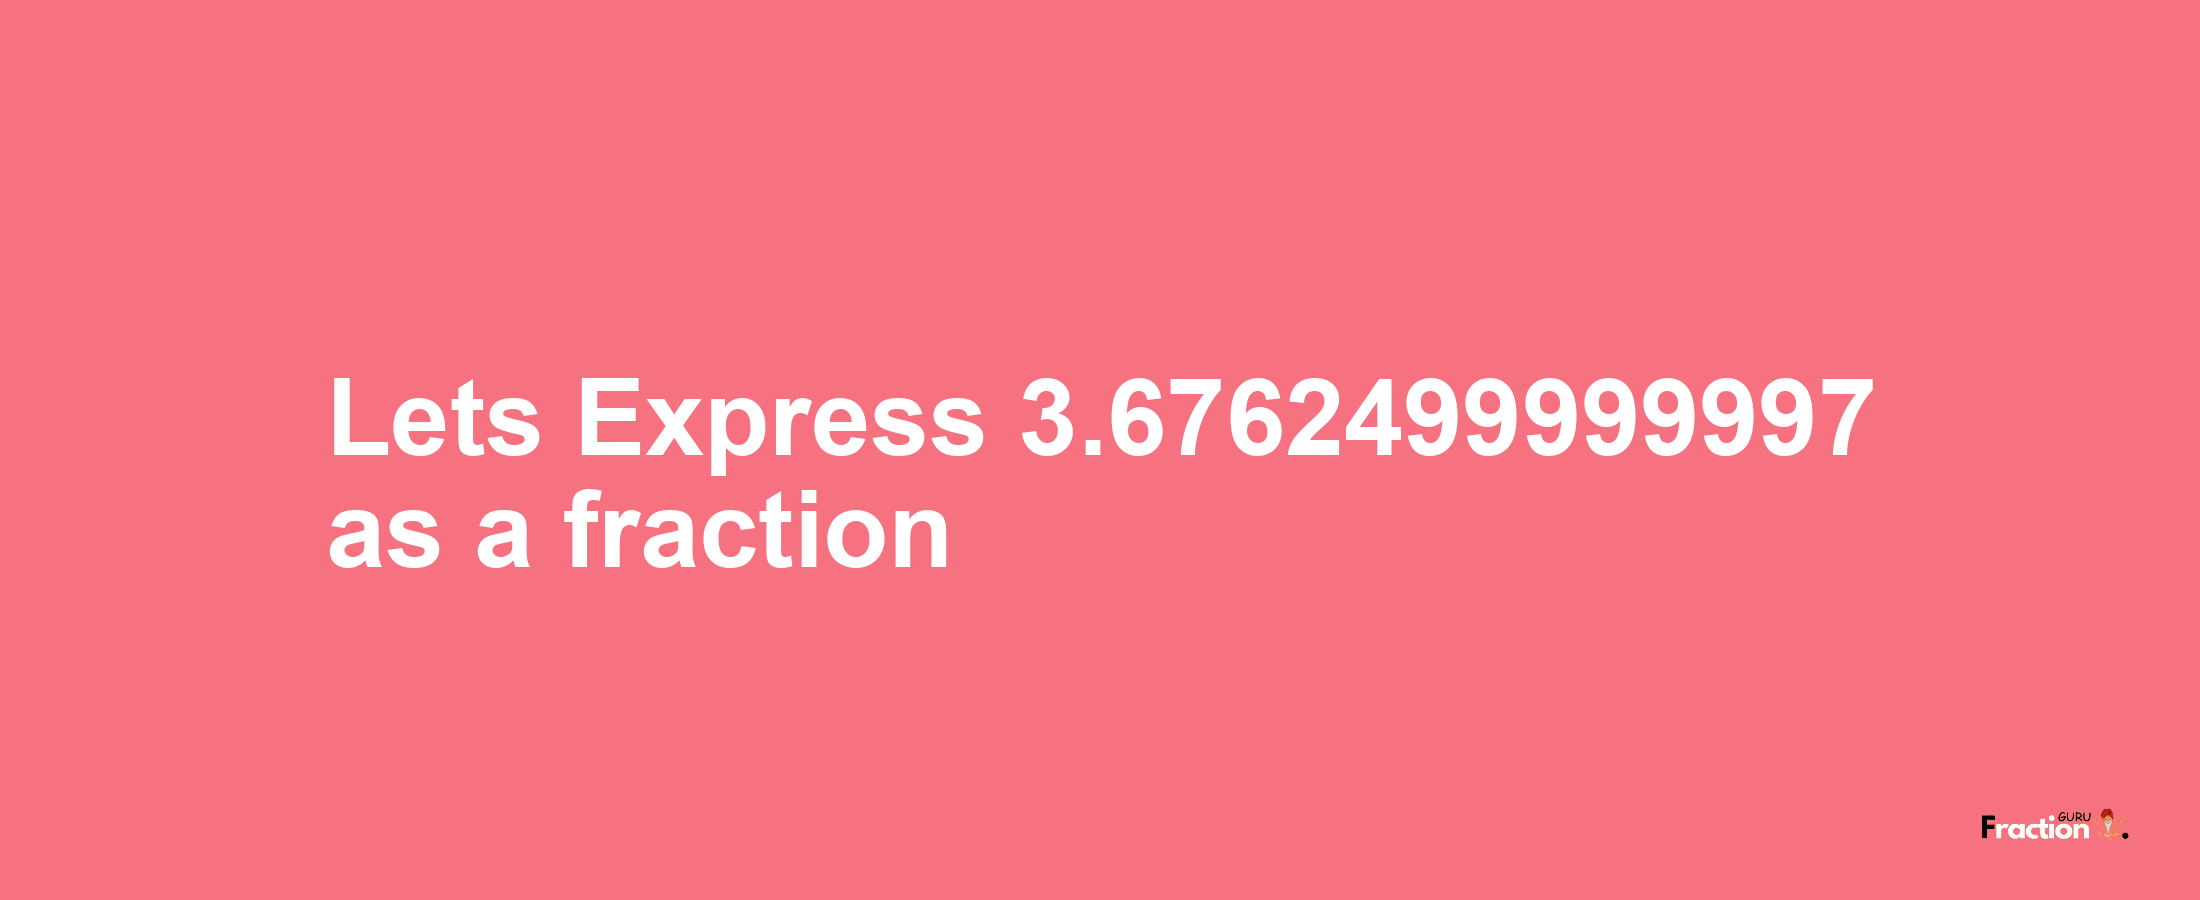 Lets Express 3.6762499999997 as afraction